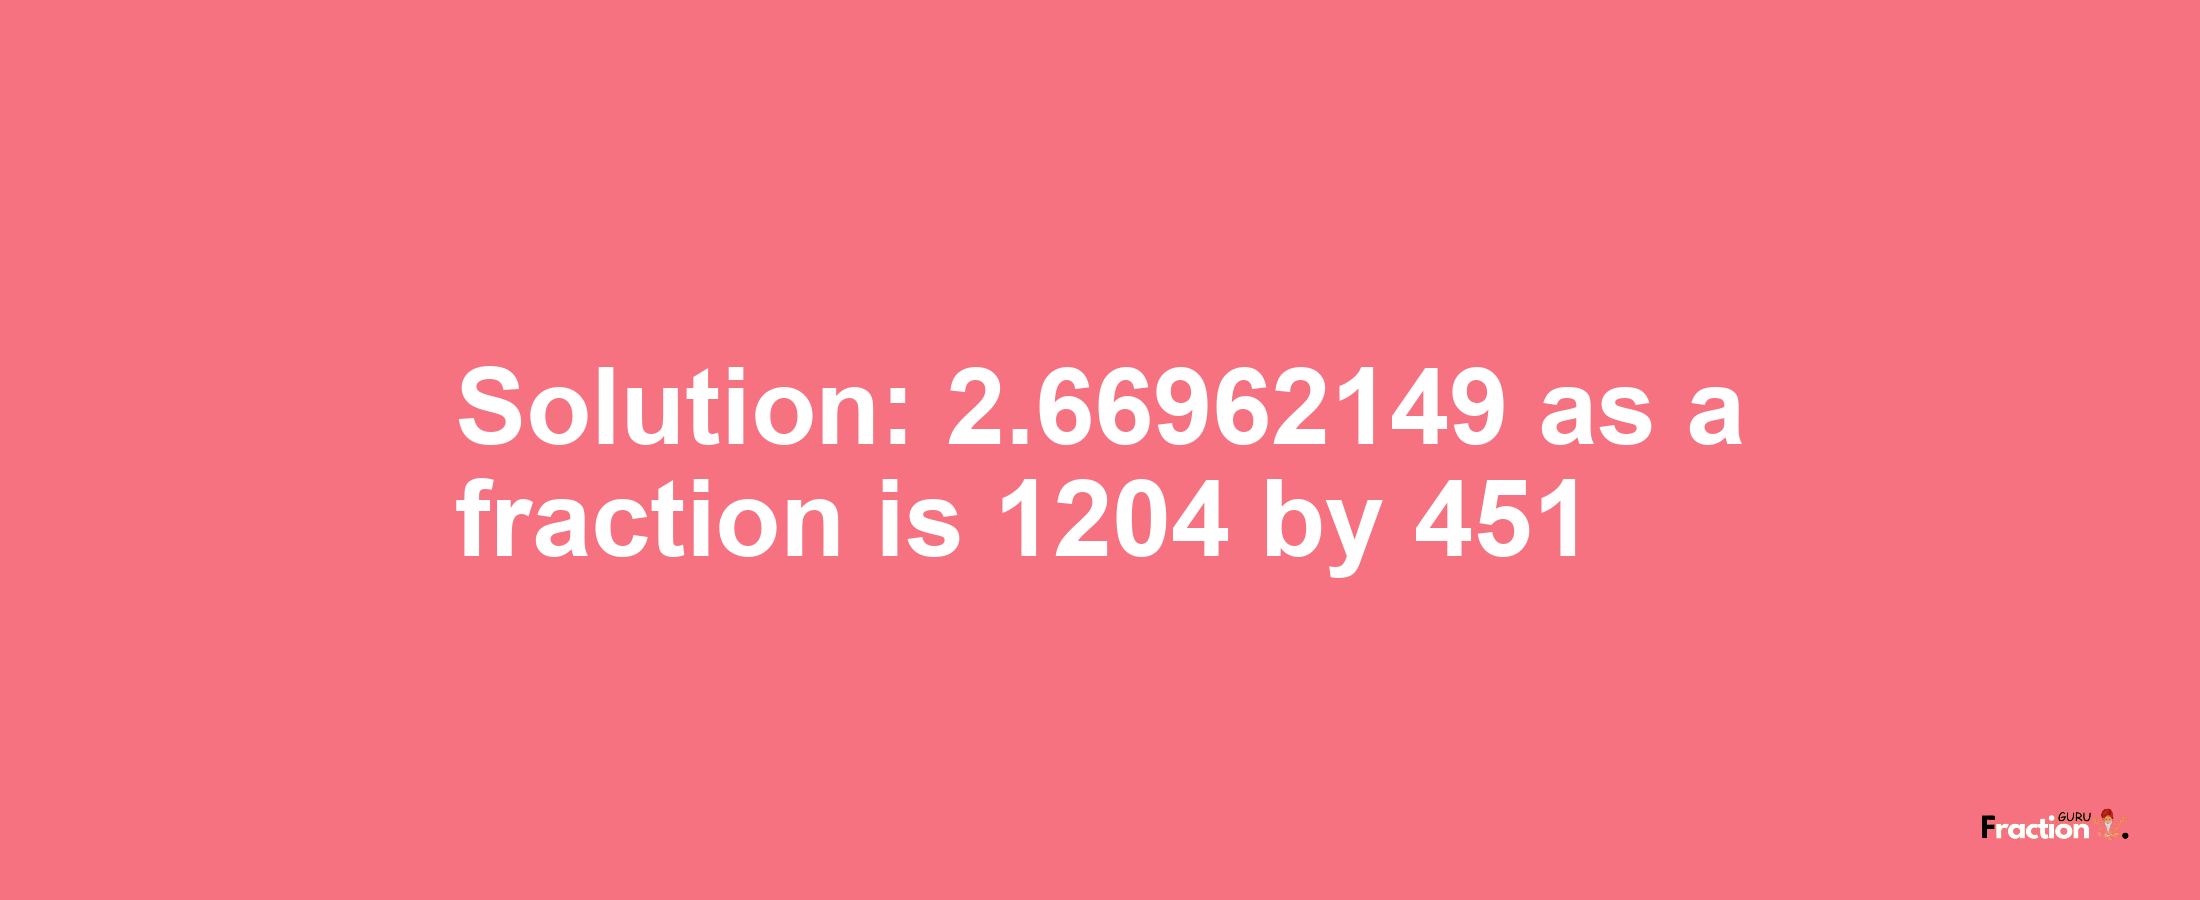 Solution:2.66962149 as a fraction is 1204/451